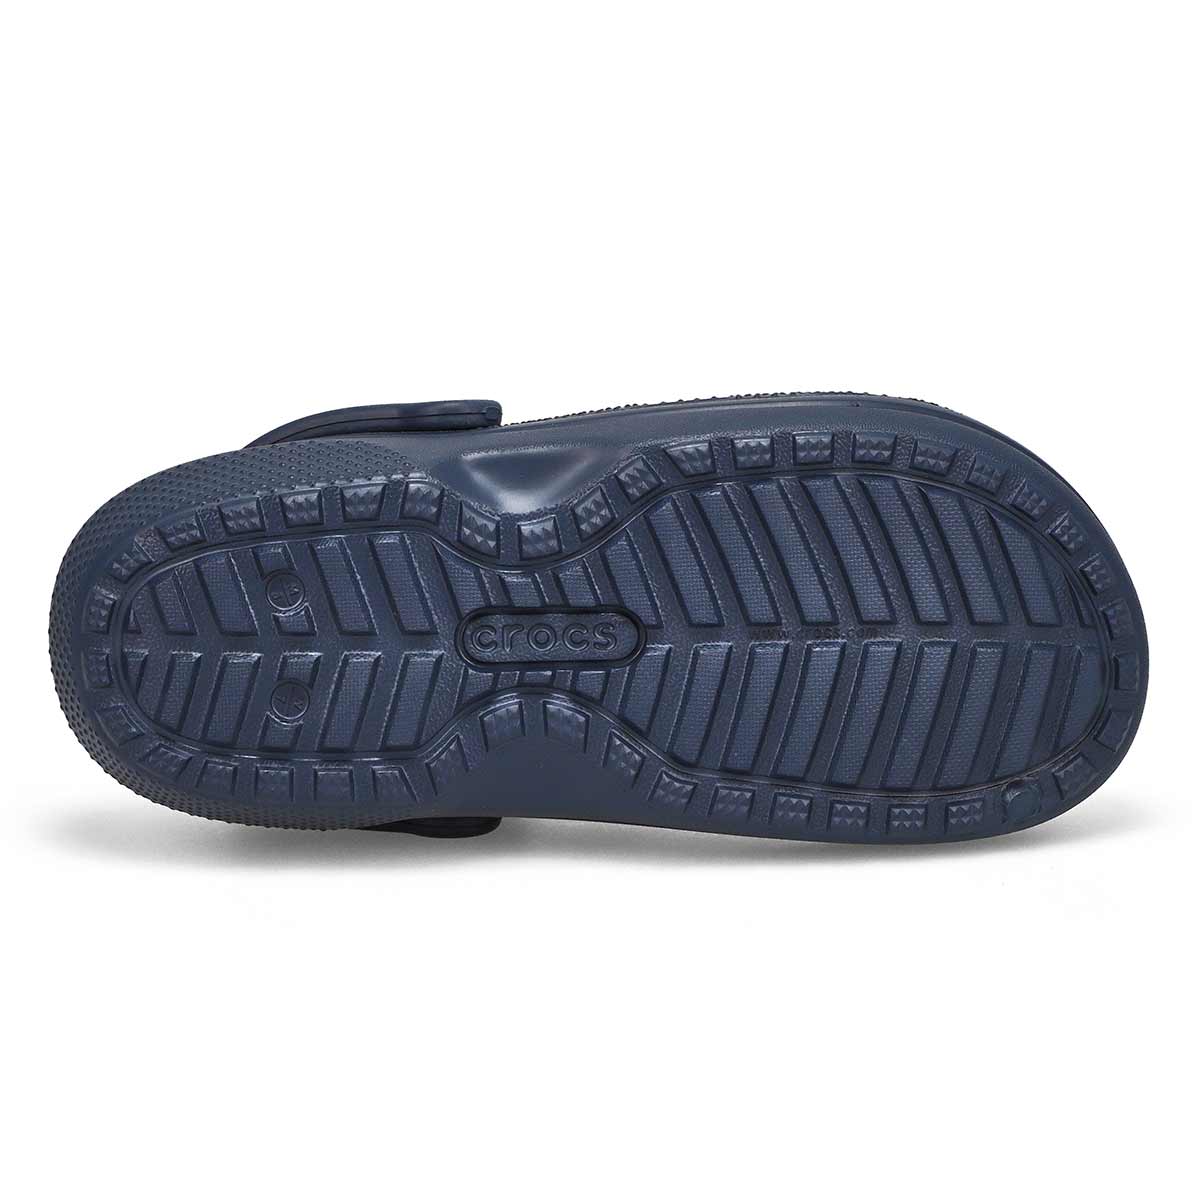 Women's Classic Lined Comfort Clog - Navy/Charcoal